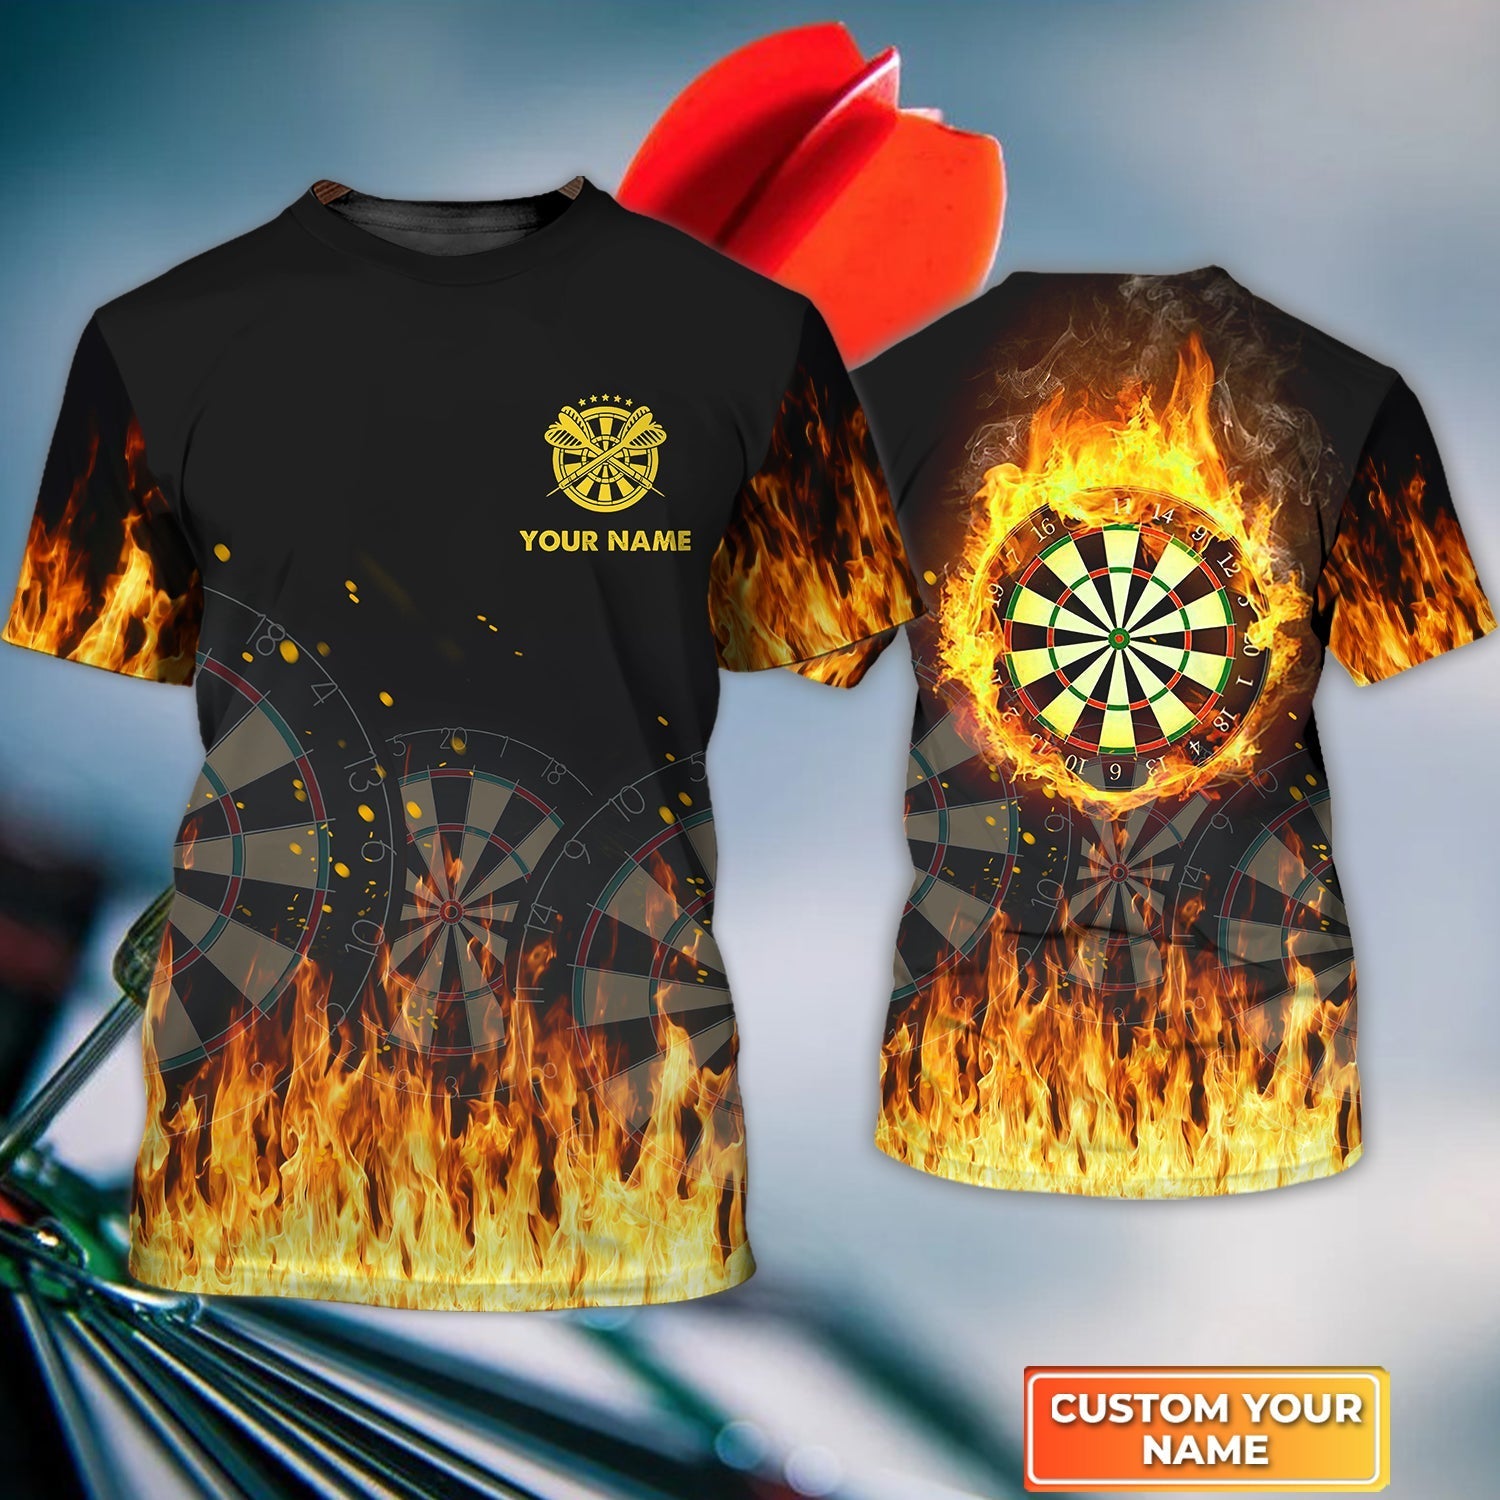 Bullseye Dartboard Personalized Name 3D Eagle And Darts Tshirt For Dart Team Player Tad – DT007